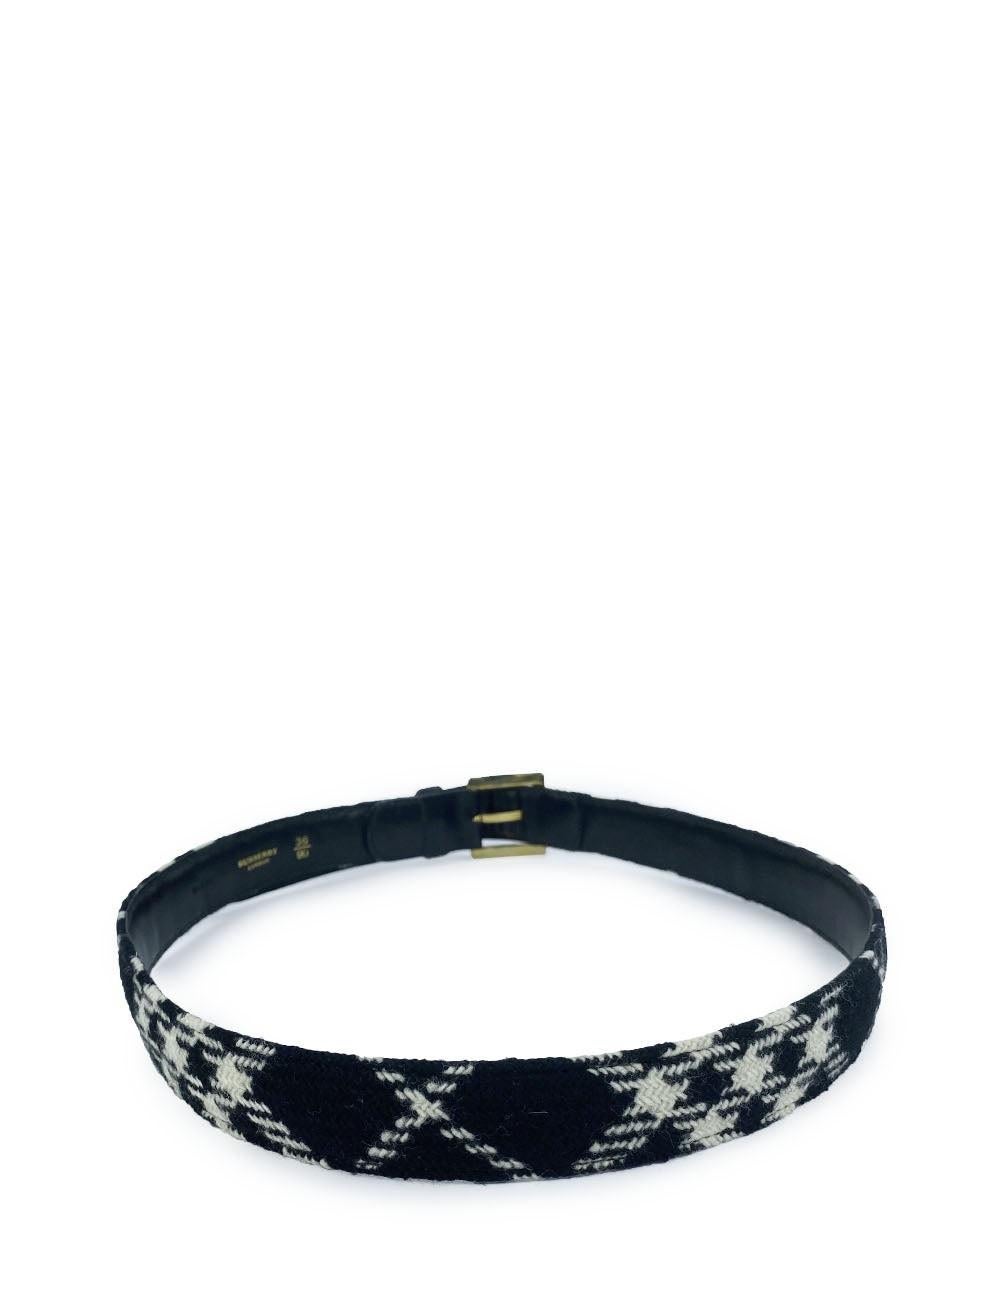 Black and White Check Belt.

Additional information:
Hardware: Gold Tone
Size: 36
Condition: Gently Loved